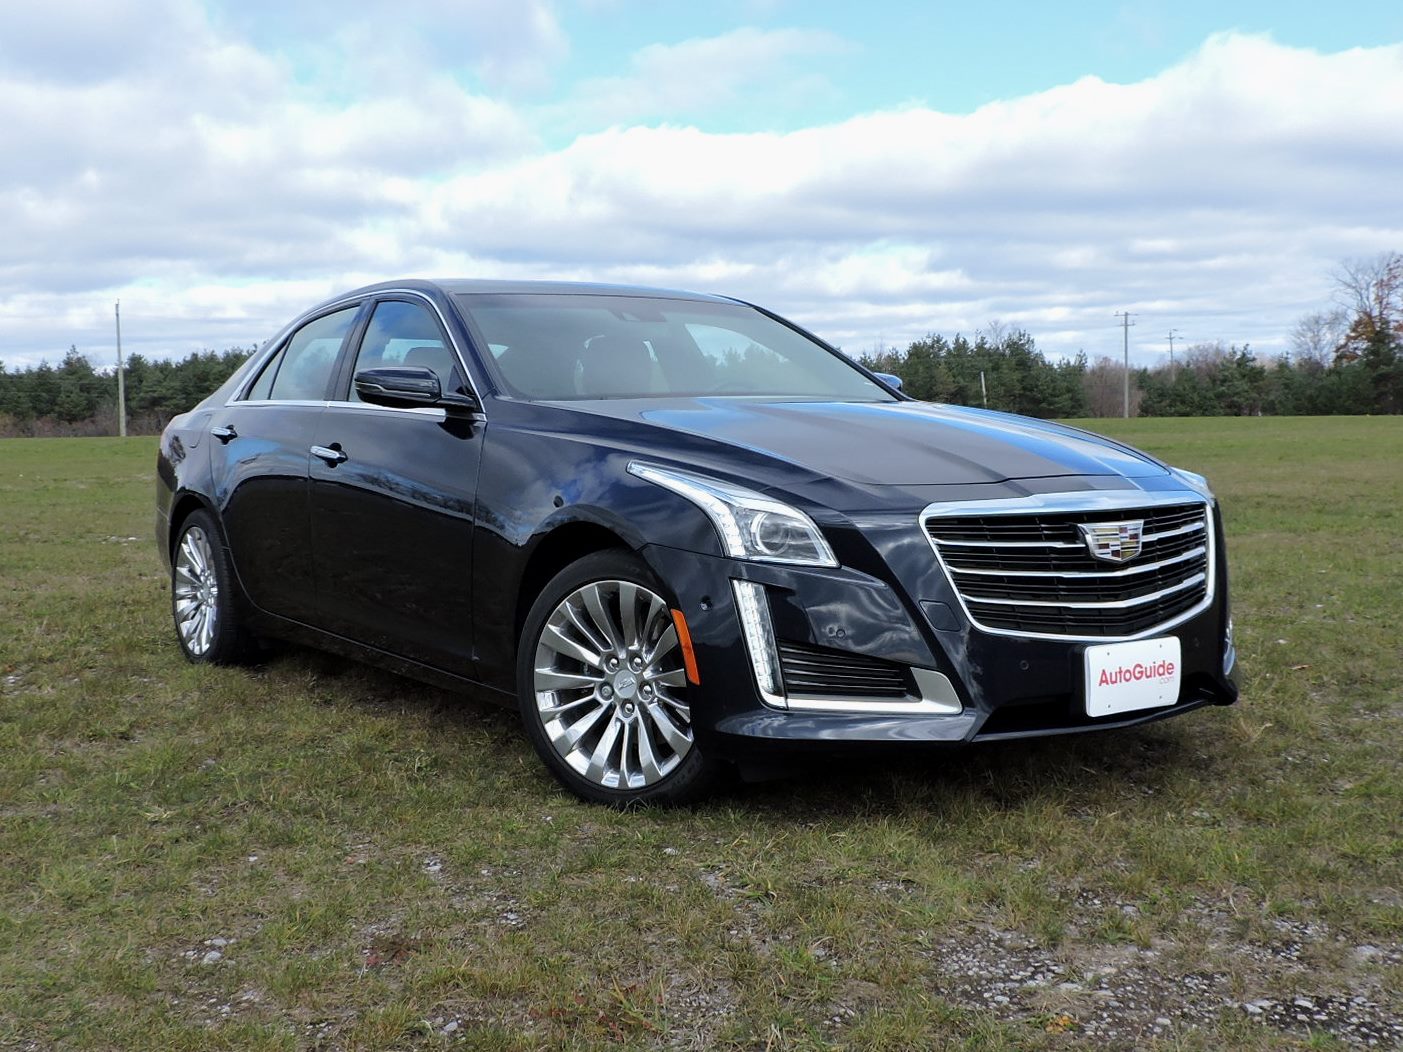 Cadillac CTS Pics, Vehicles Collection